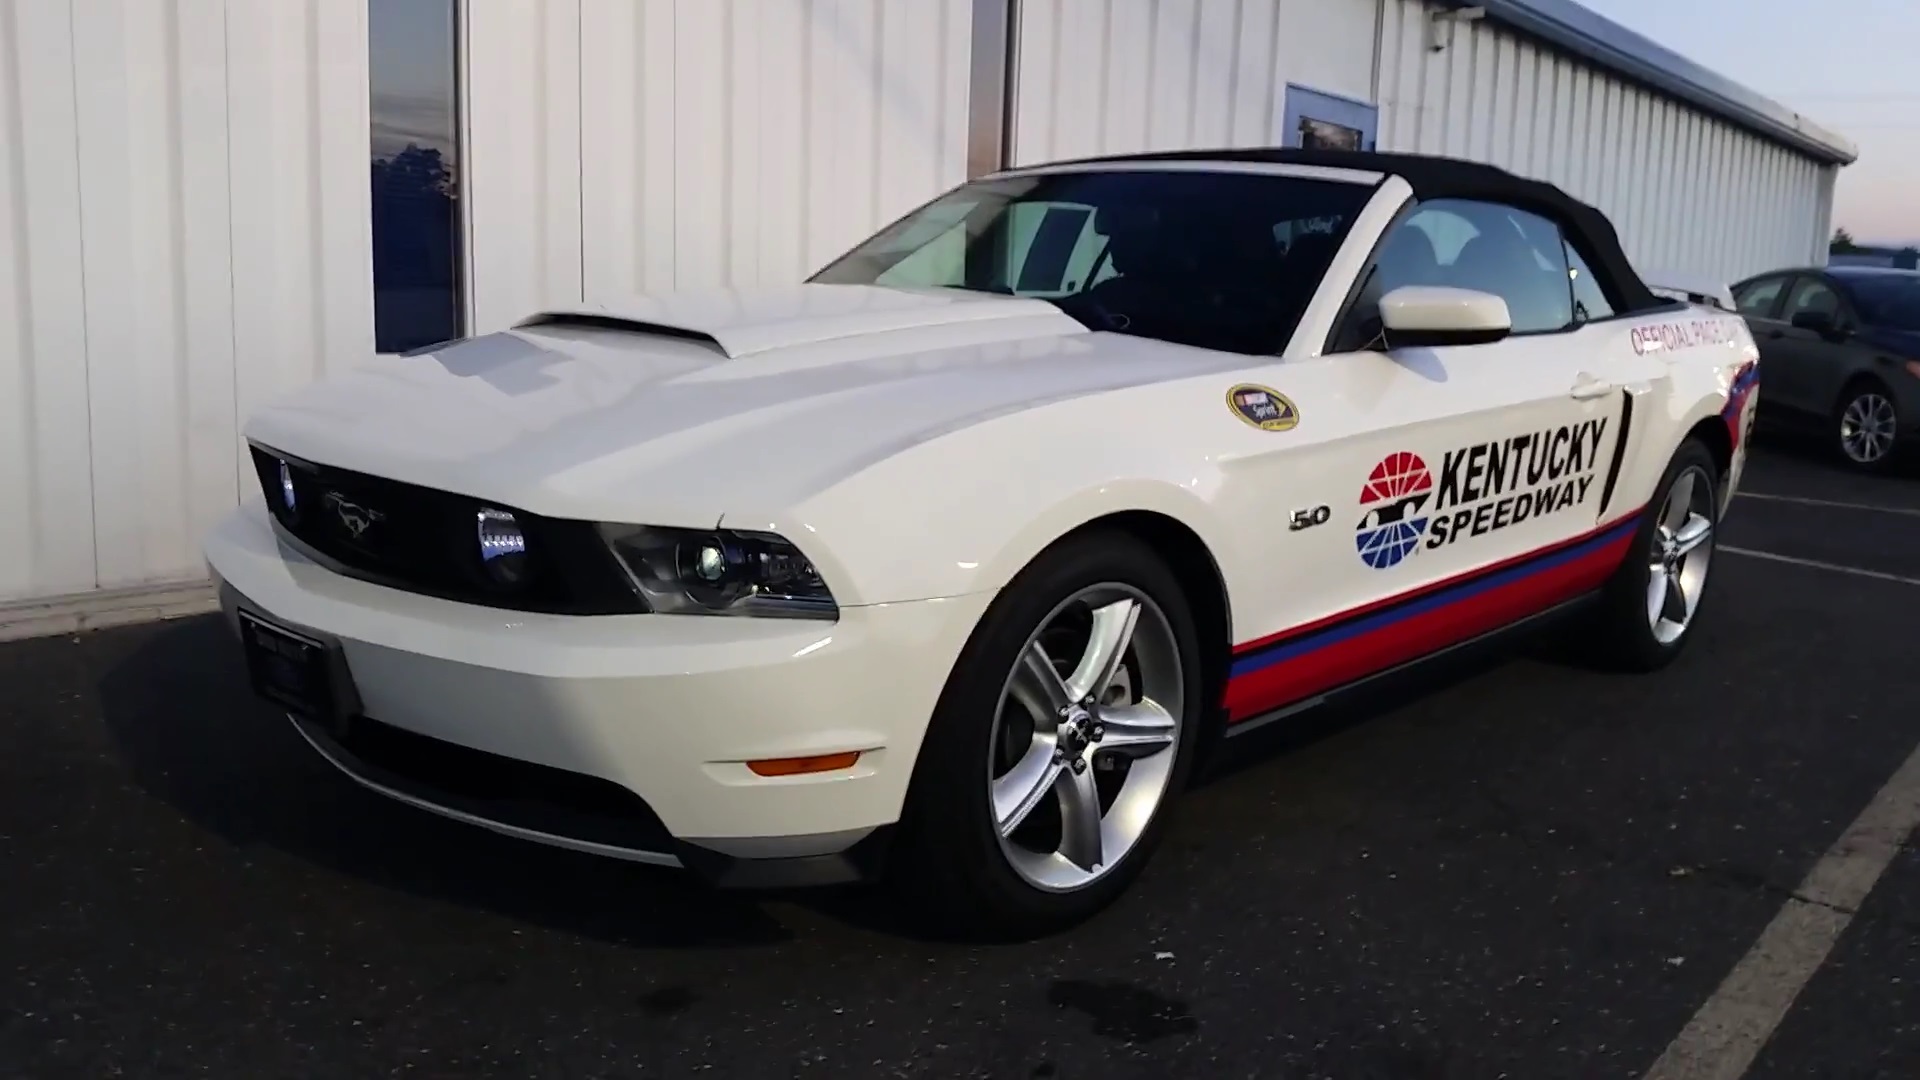 Mustang Of The Day: 2012 Ford Mustang Kentucky Speedway Pace Car